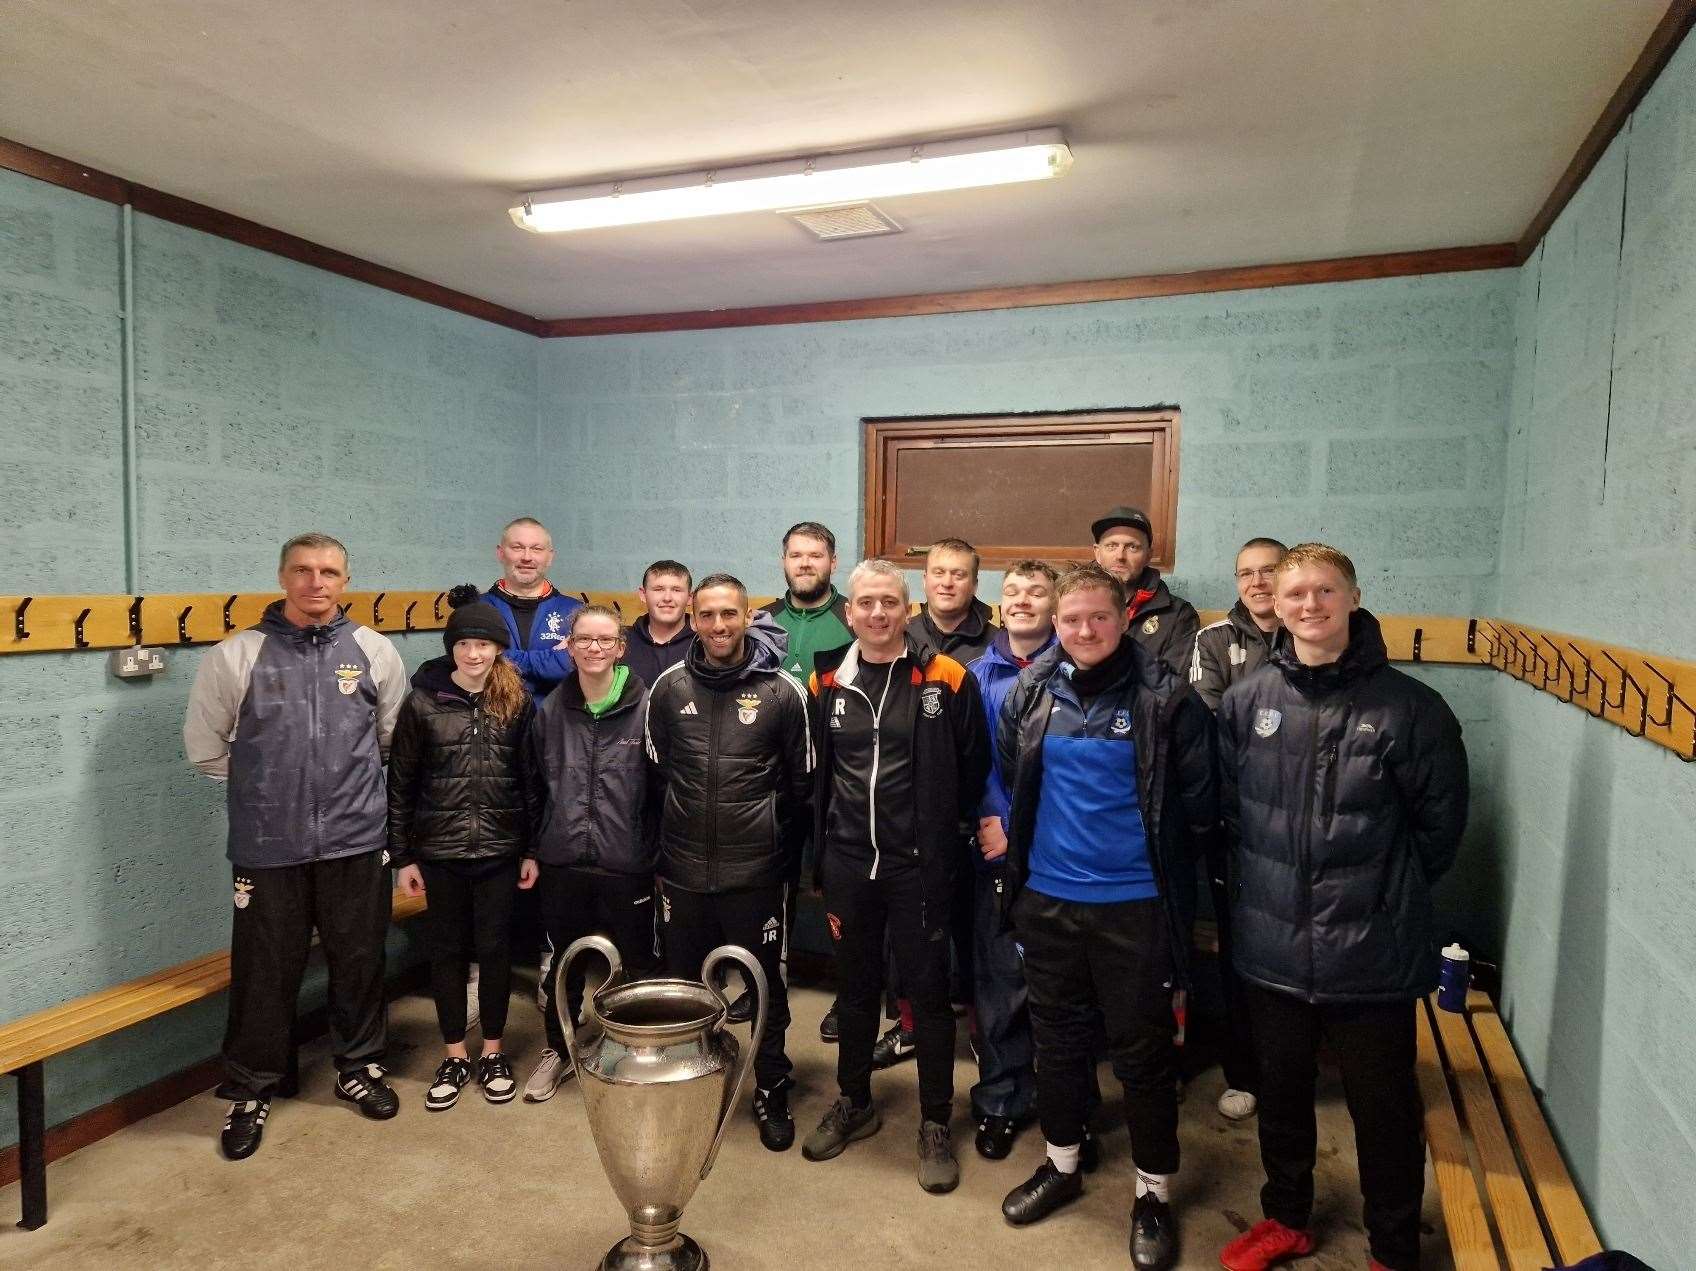 Benfica coaches held a practical coaching education course for local coaches at the Thurso Football Academy.